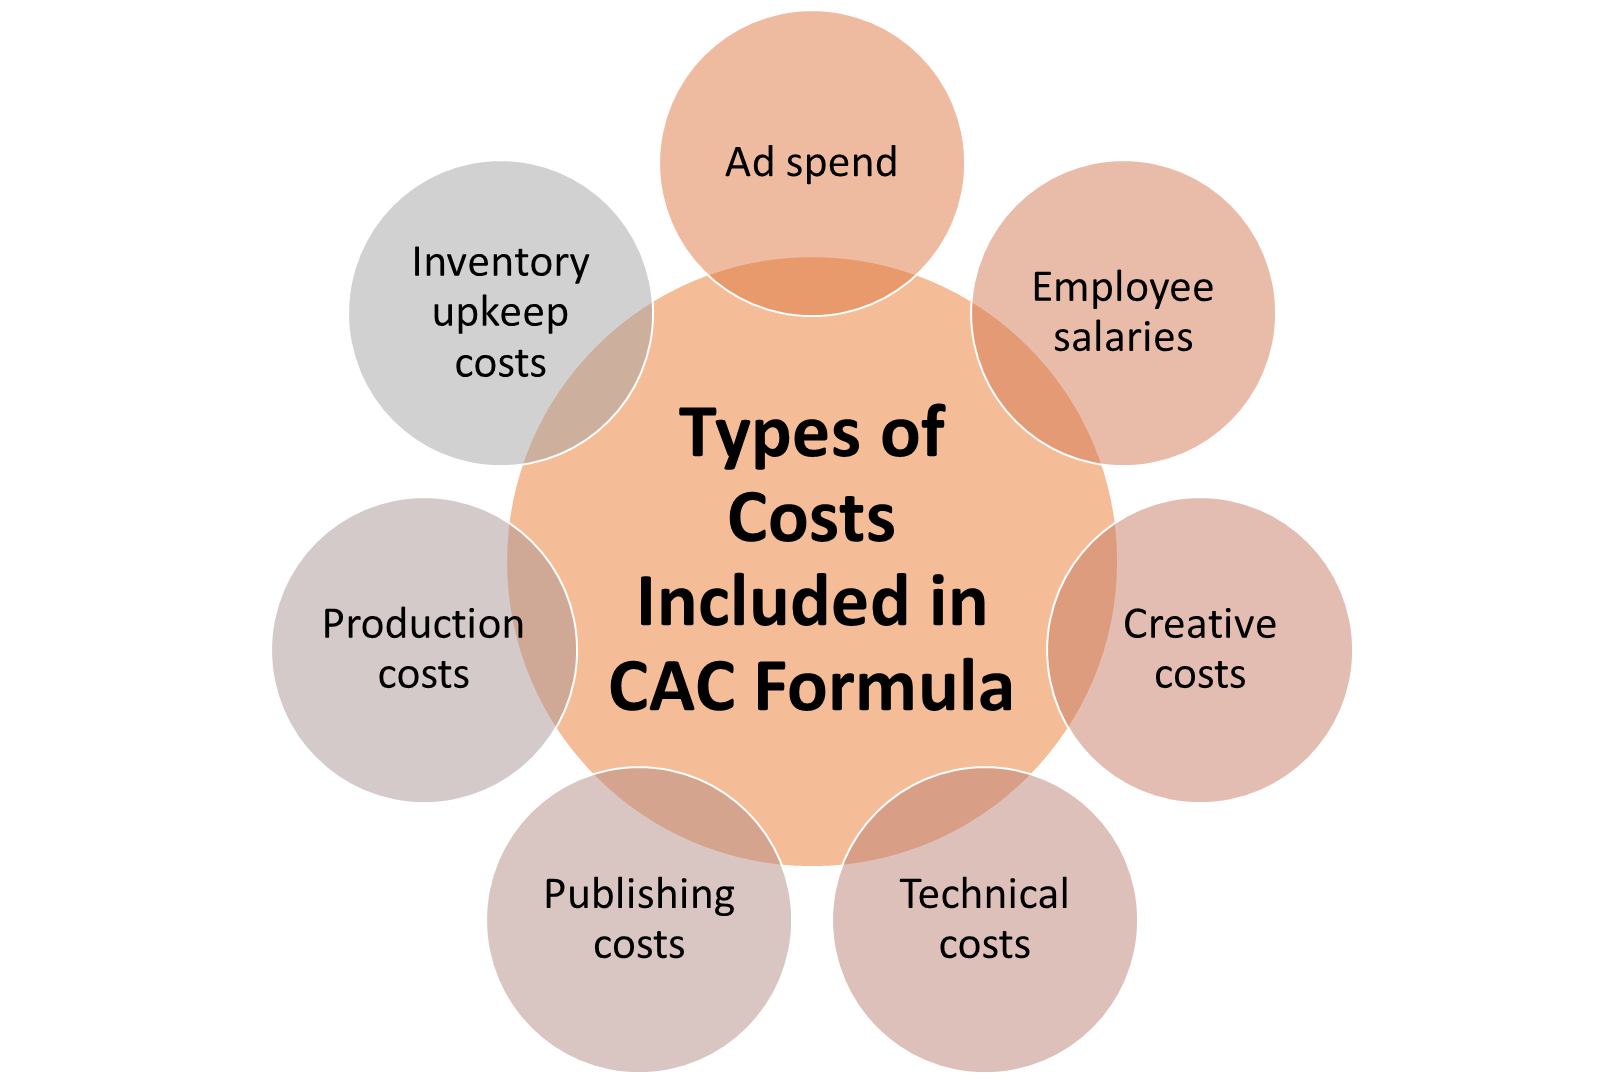 Types of Costs Included in CAC Formula